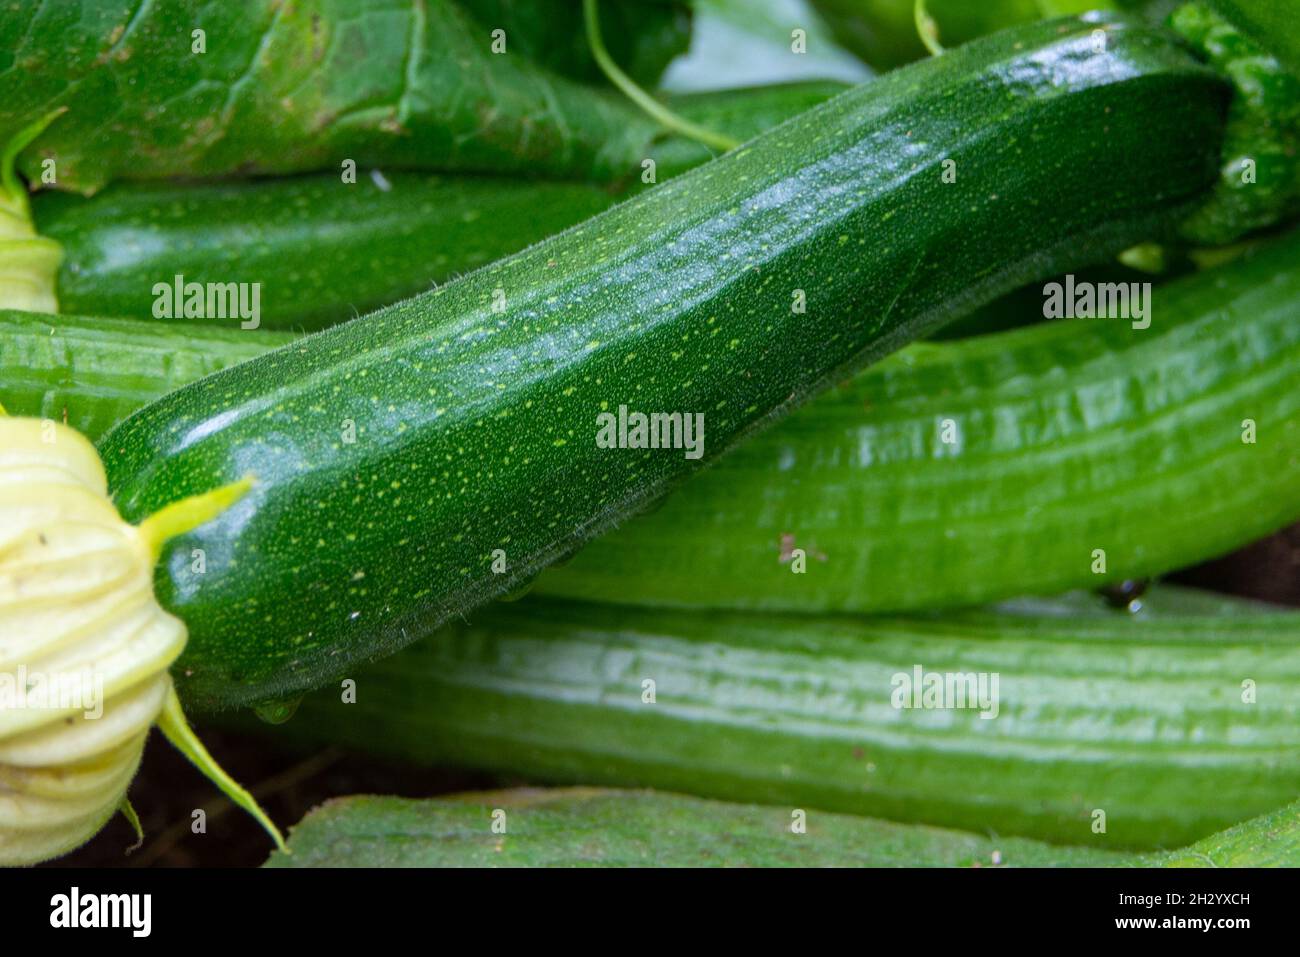 Large raw green oblong marrow zucchini vegetable stacked on a table with yellow leaves on top. The fresh colorful organic crop has a thick long glossy Stock Photo